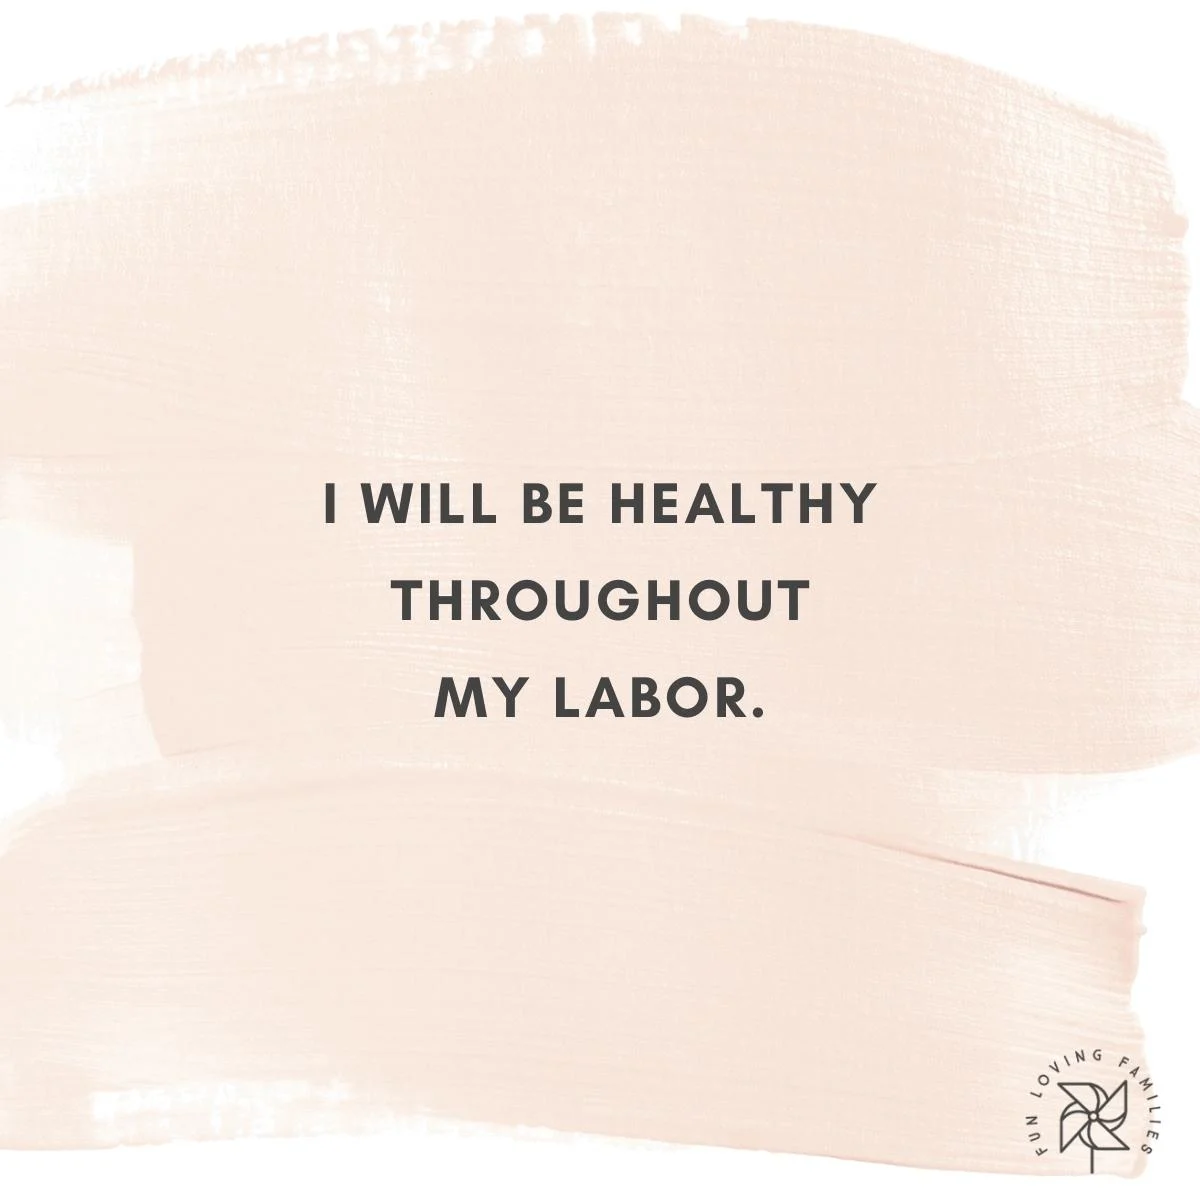 I will be healthy throughout my labor affirmation